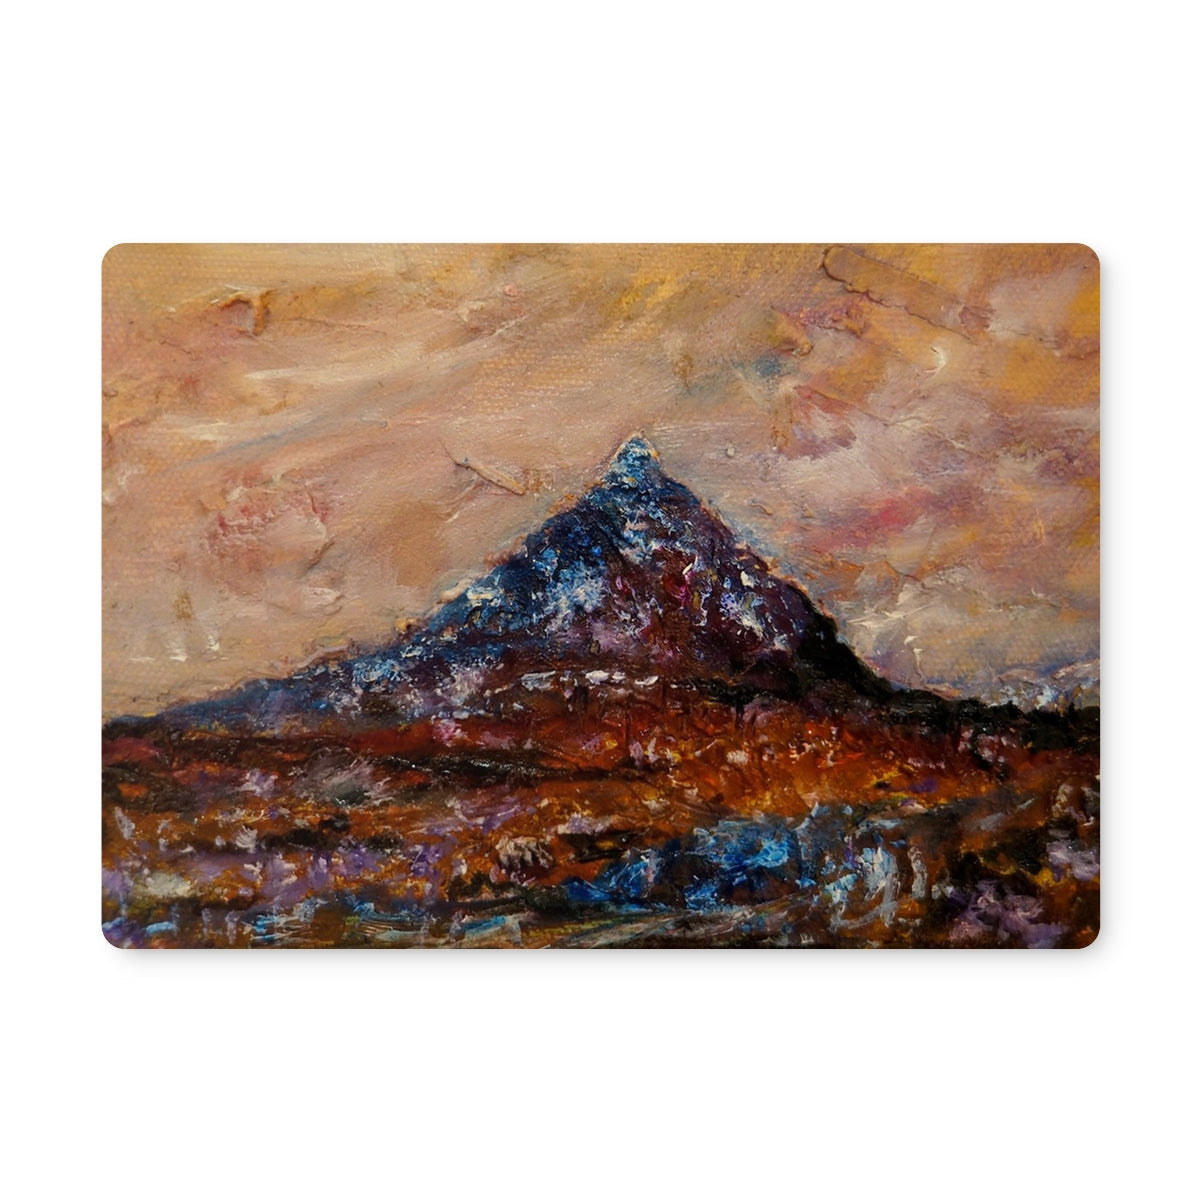 Buachaille Etive Mòr Art Gifts Placemat-Placemats-Glencoe Art Gallery-Single Placemat-Paintings, Prints, Homeware, Art Gifts From Scotland By Scottish Artist Kevin Hunter